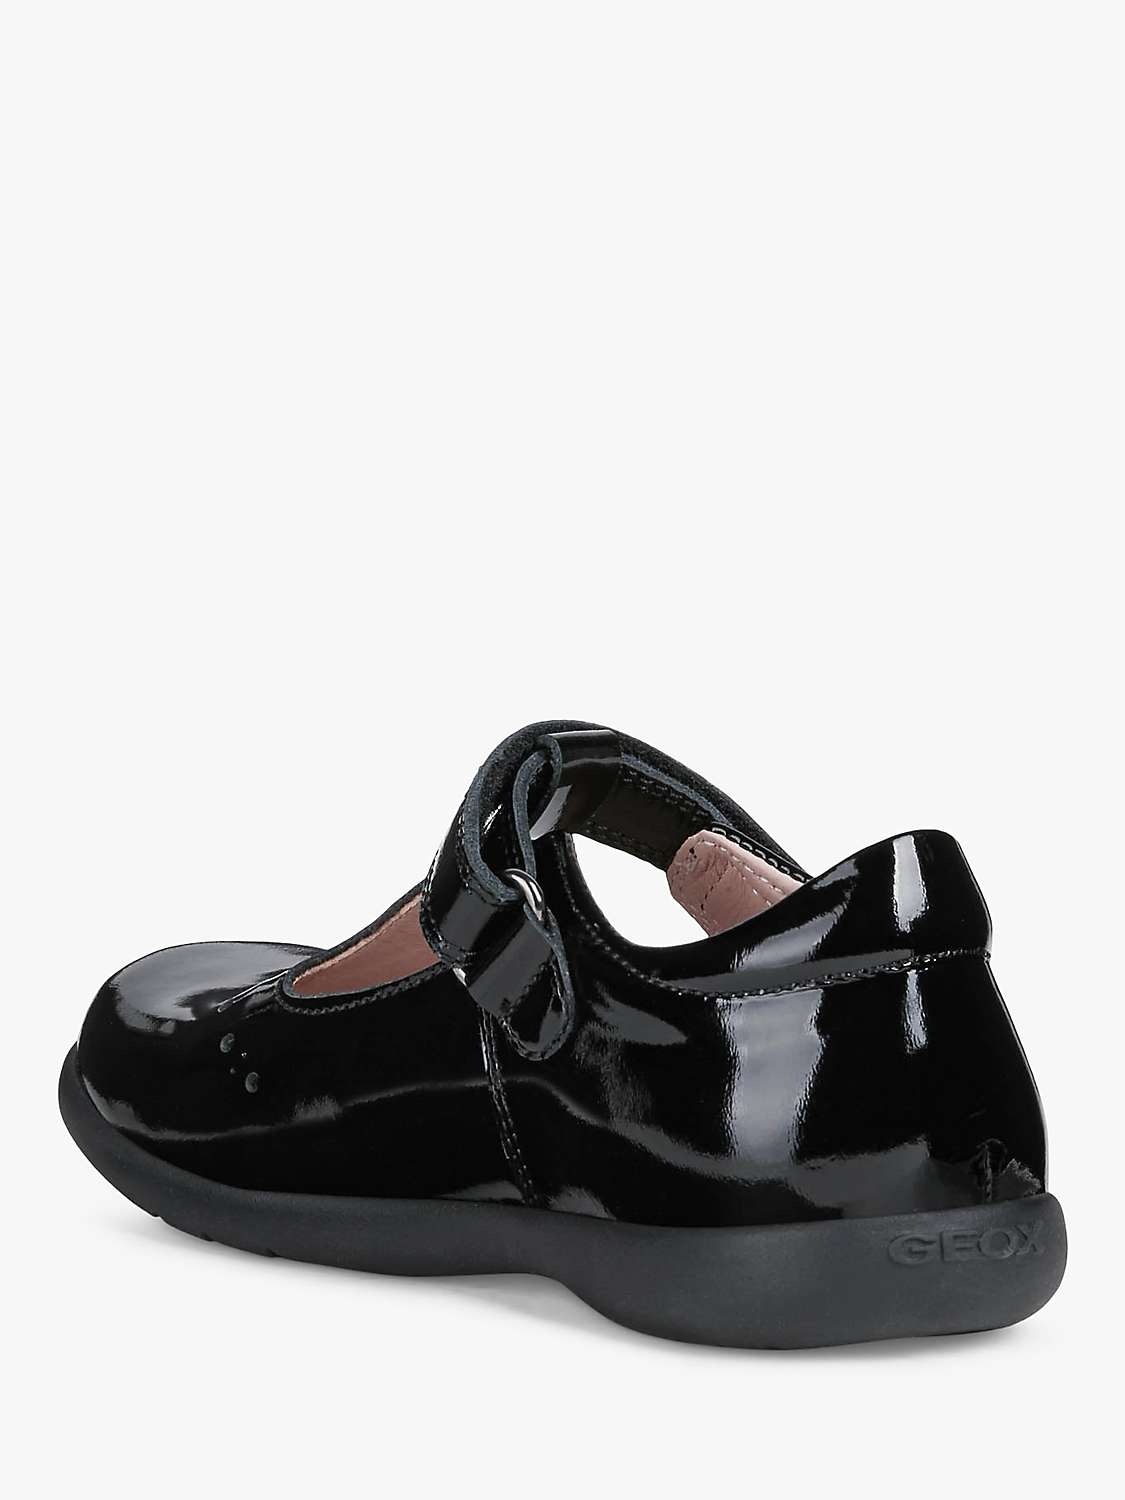 Buy Geox Kids' Naimara Patent Leather T-Bar School Shoes Online at johnlewis.com